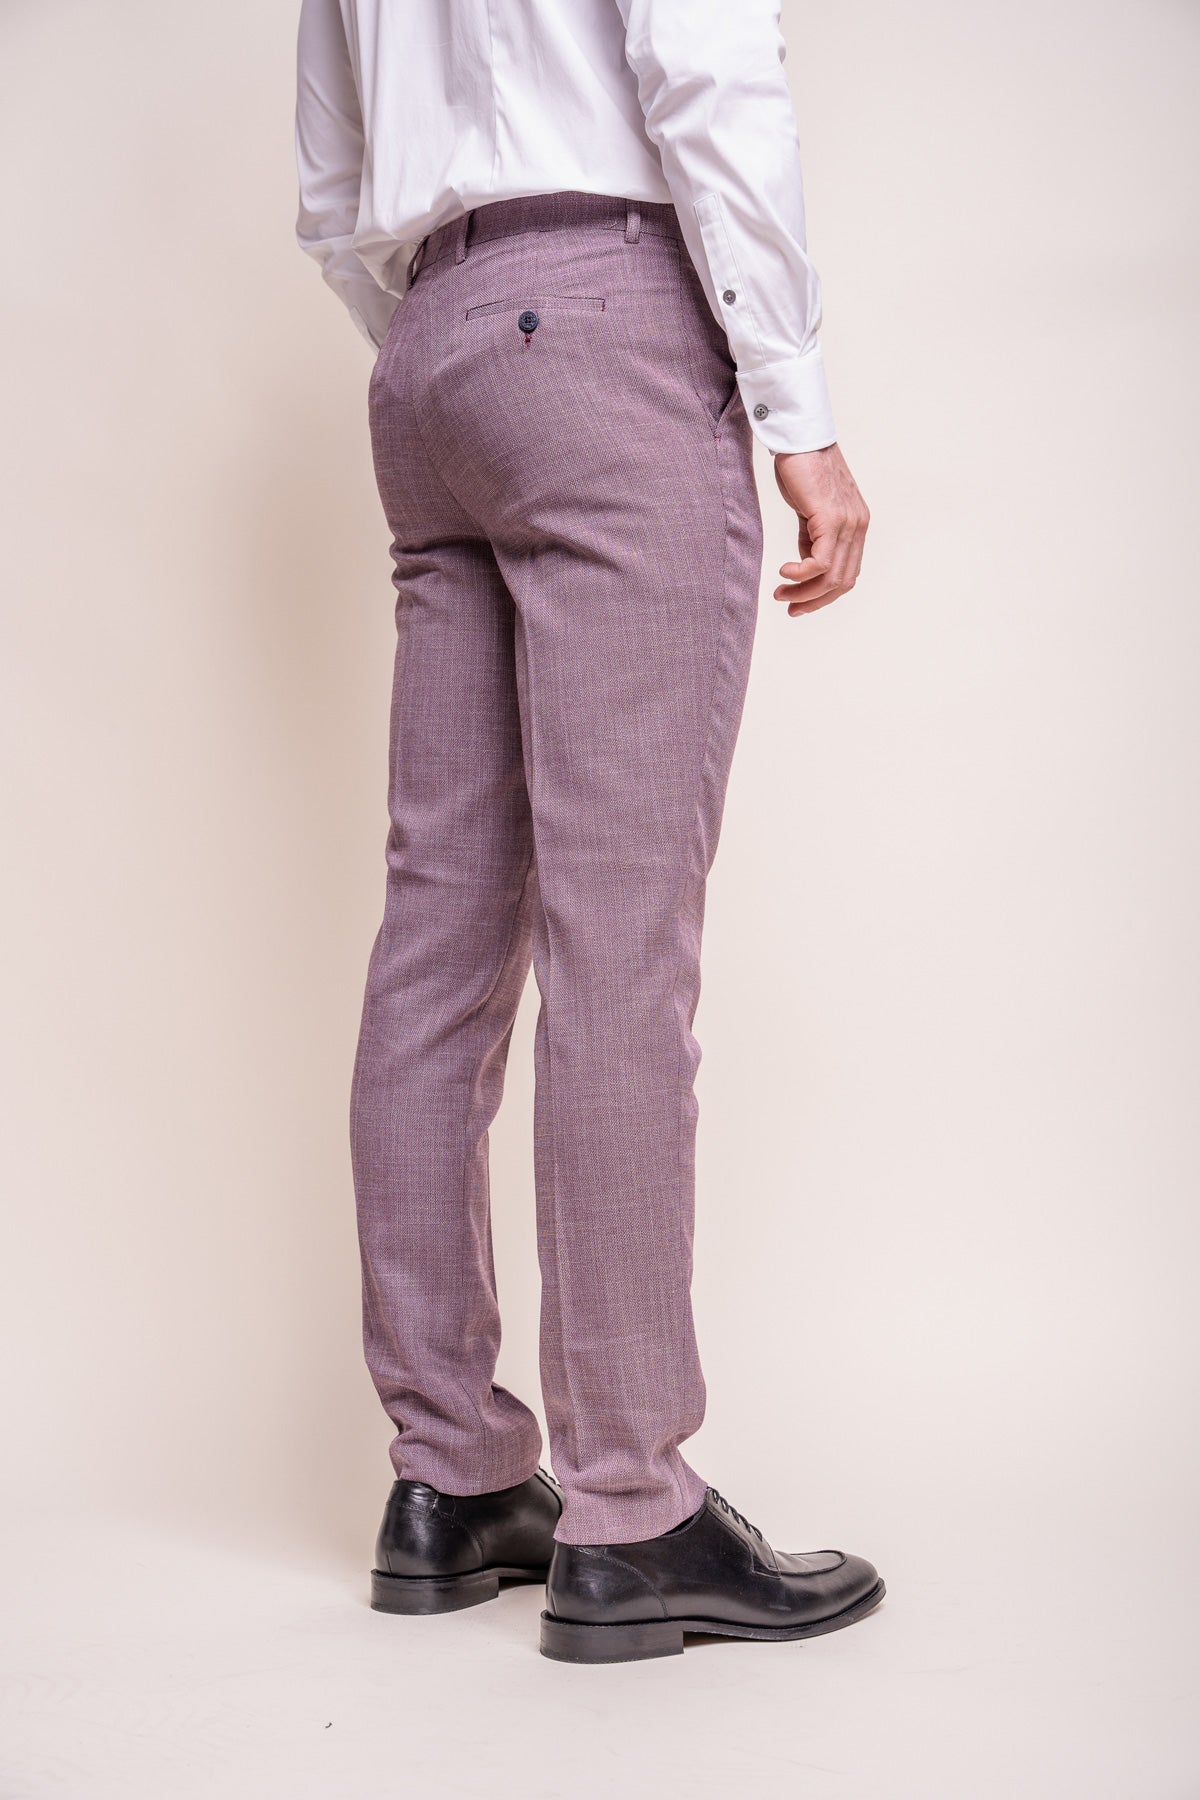 Mens Slim Fit Lilac Suit Jacket Waistcoat Trousers Sold Separately Set -  Etsy